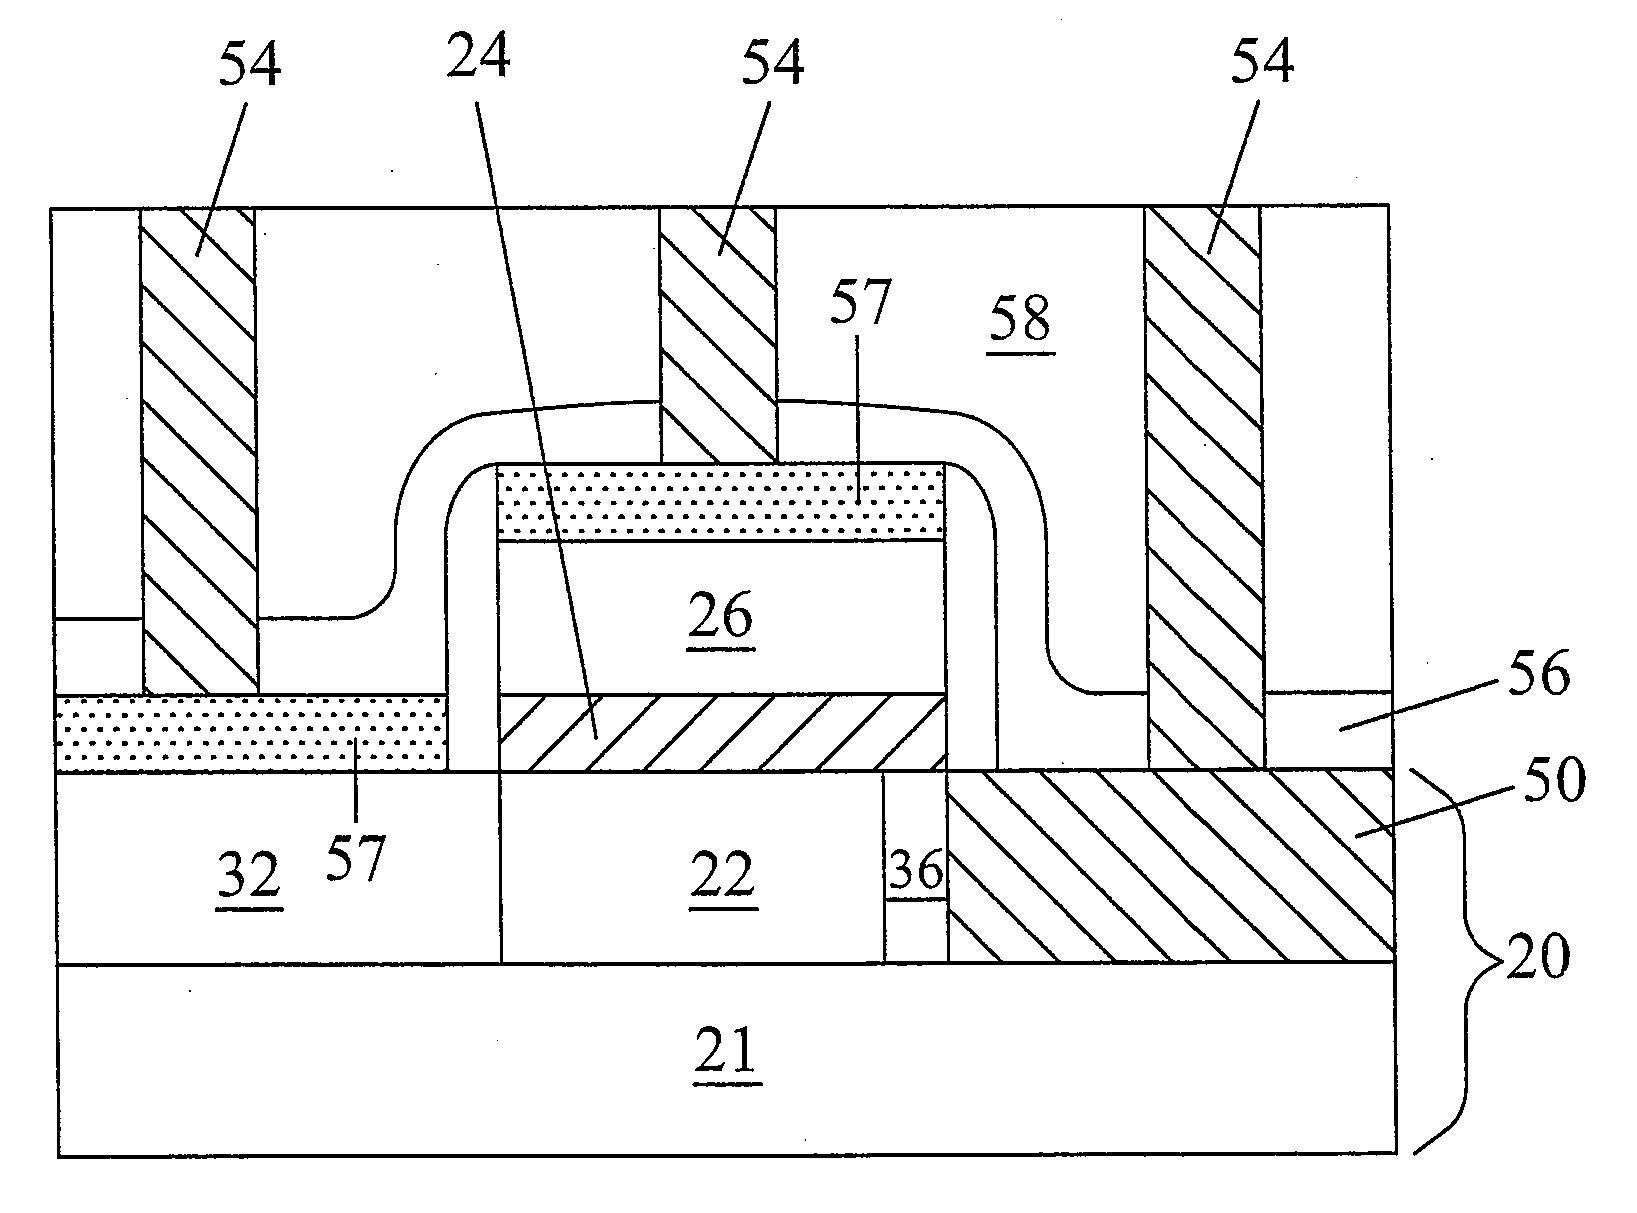 Tunnel Field-Effect Transistor with Metal Source